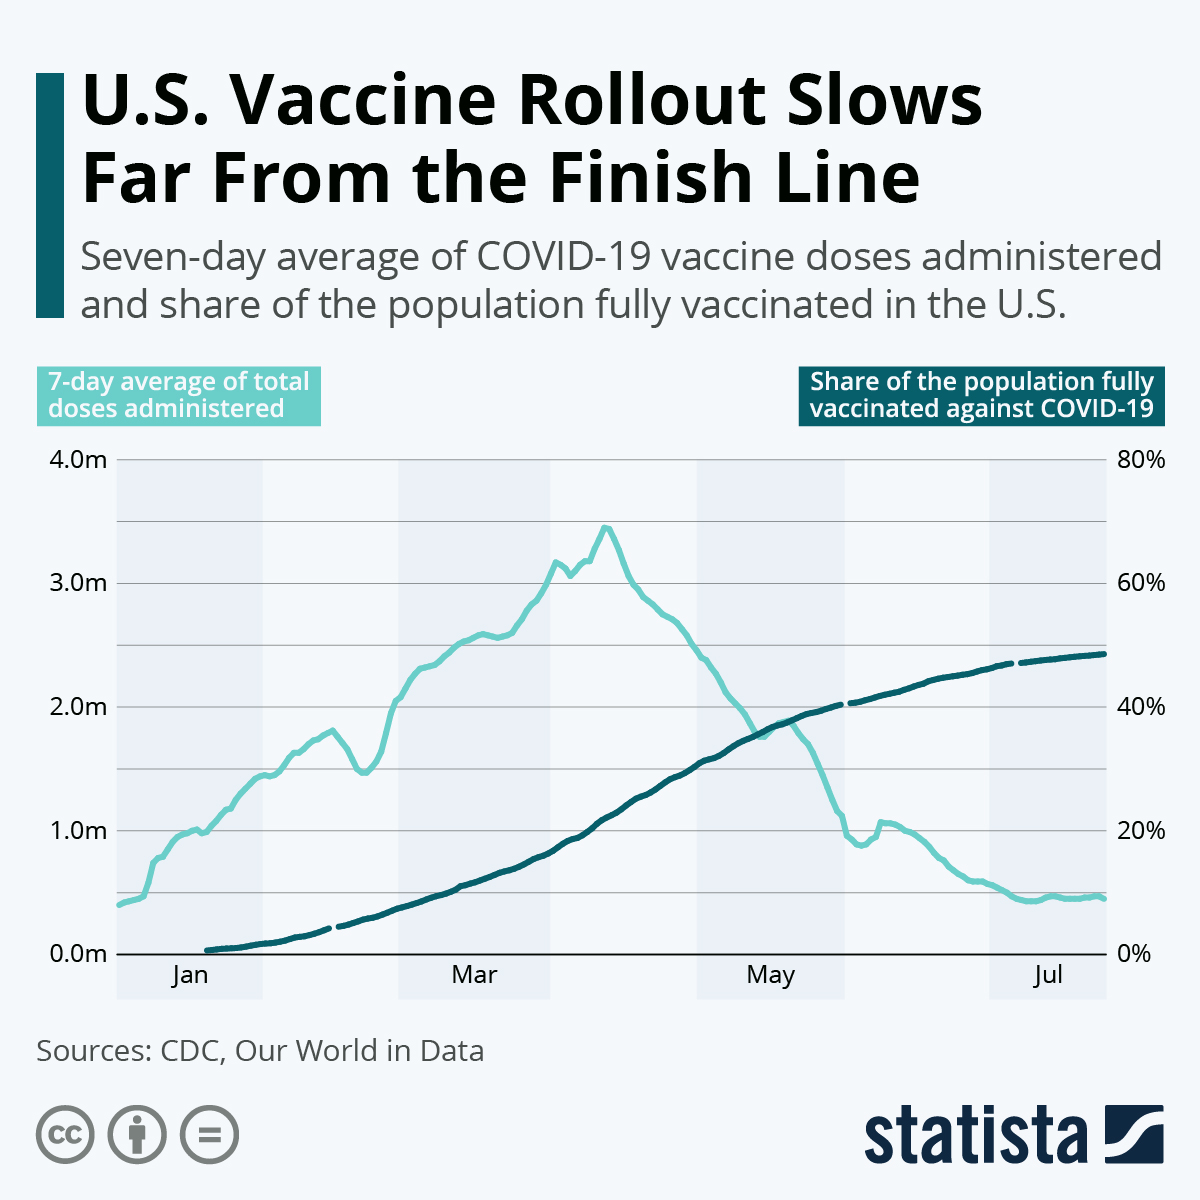 U.S. Vaccine Rollout Slows Far From the Finish Line